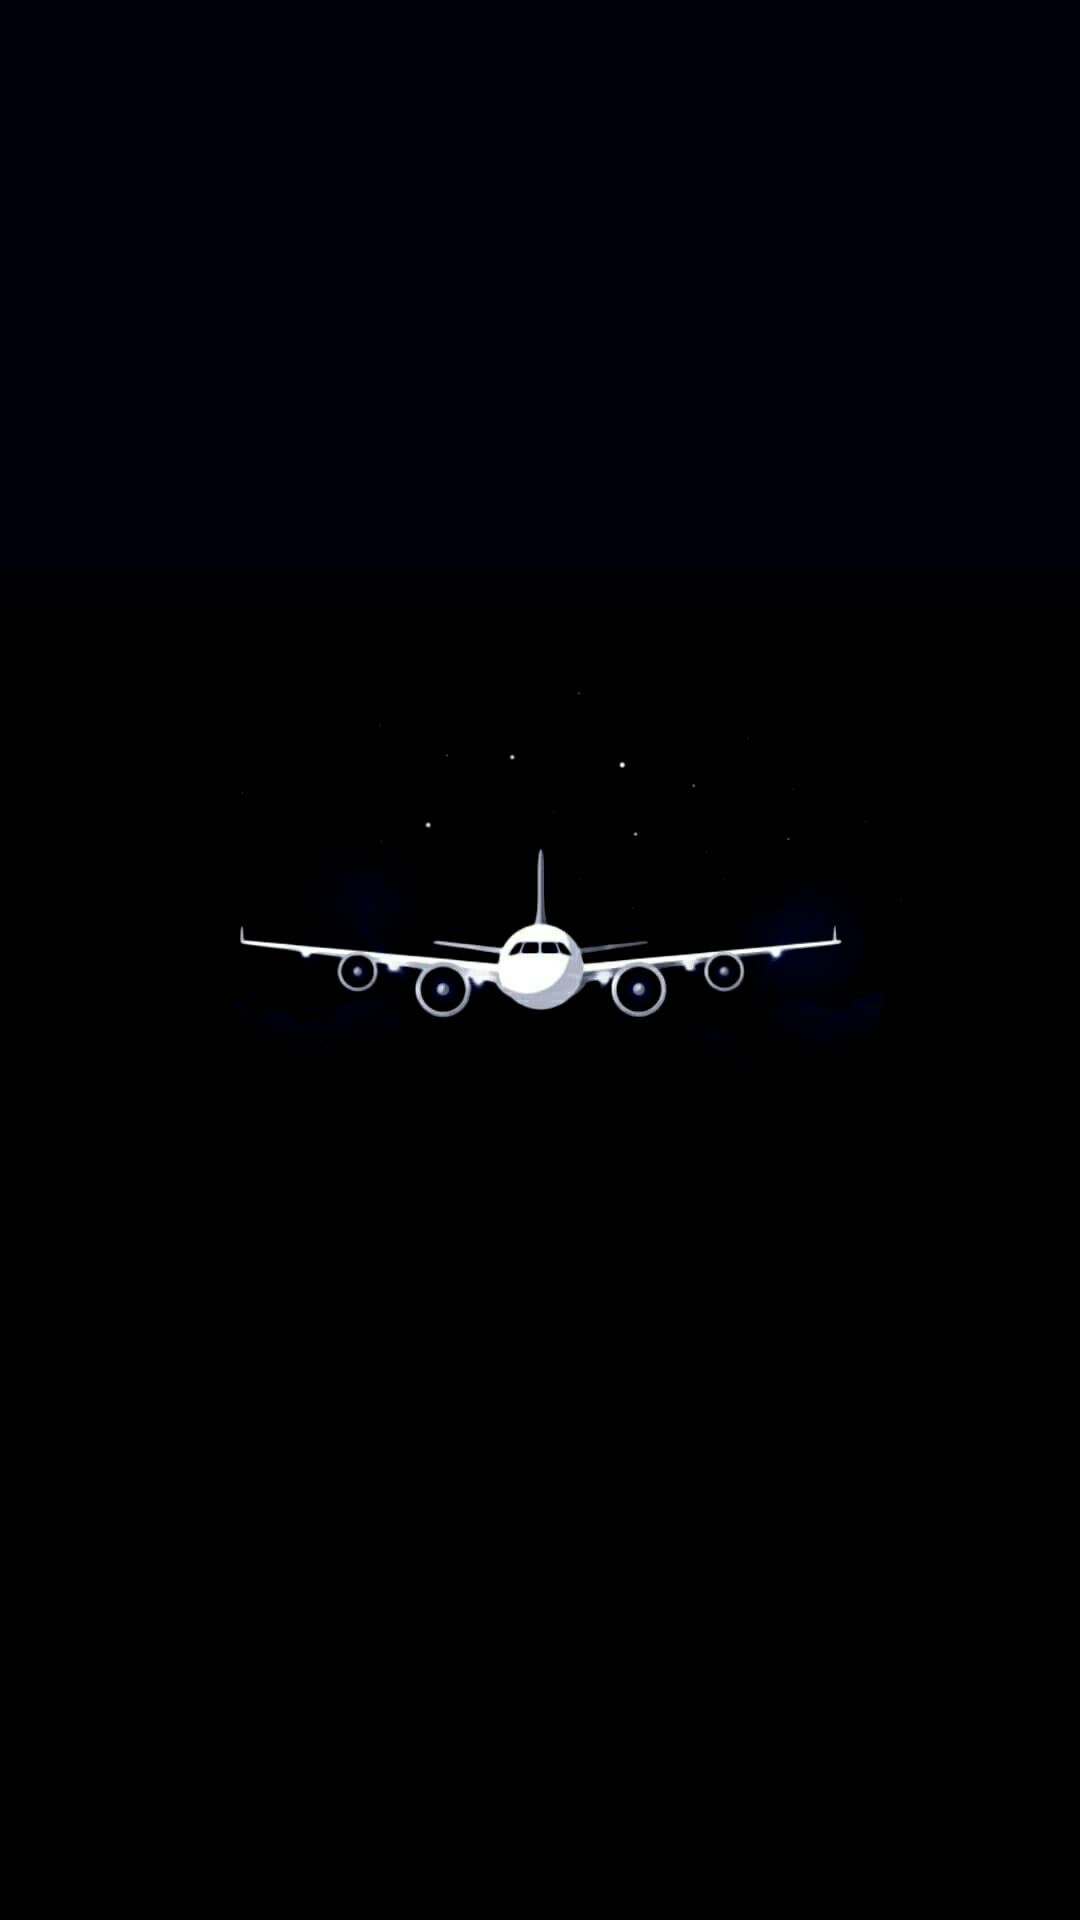 Simple Airplane Wallpaper Free Simple Airplane Background